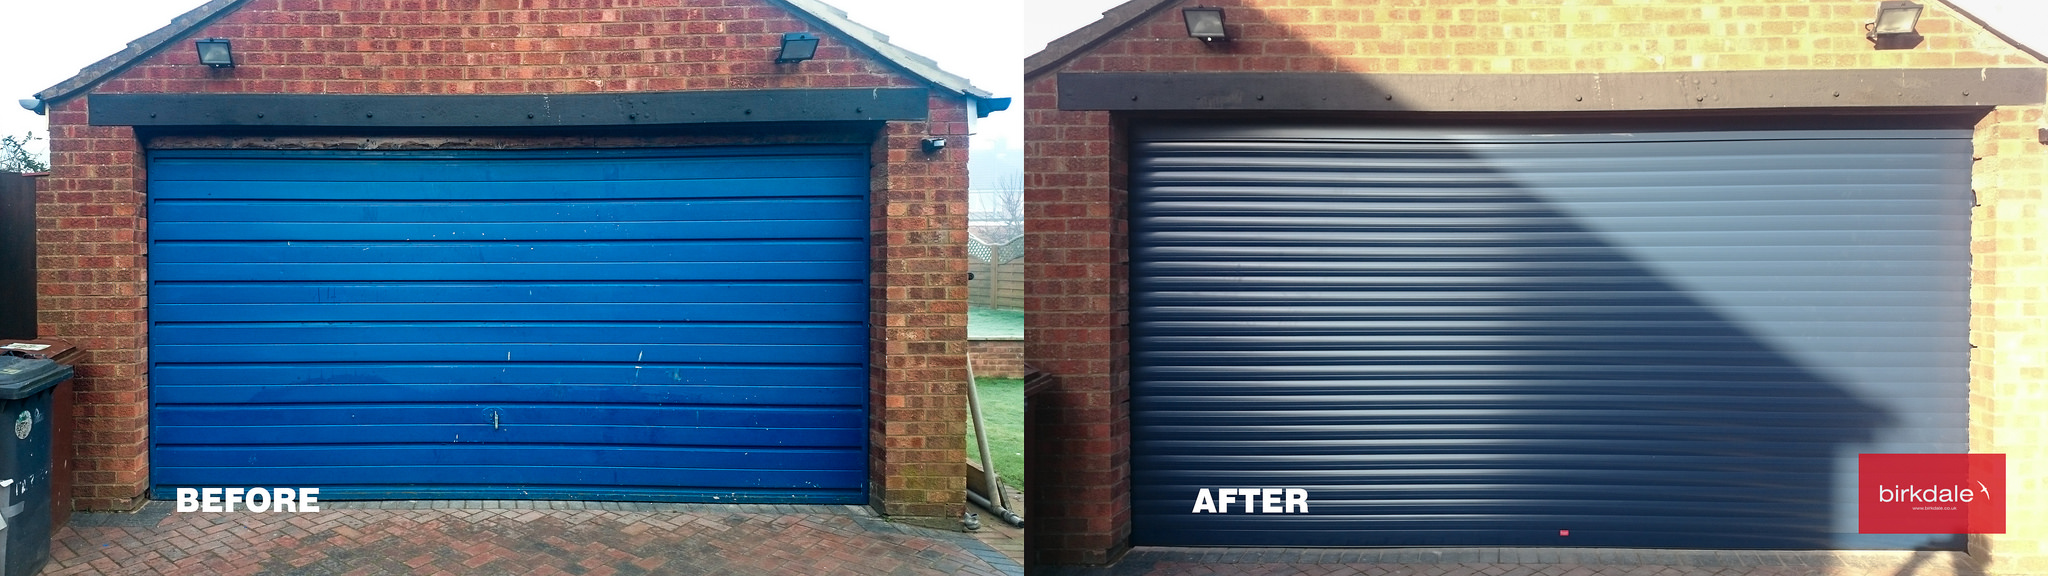 Birkdale Insulated Roller Garage Doors - Anthracite paint finish